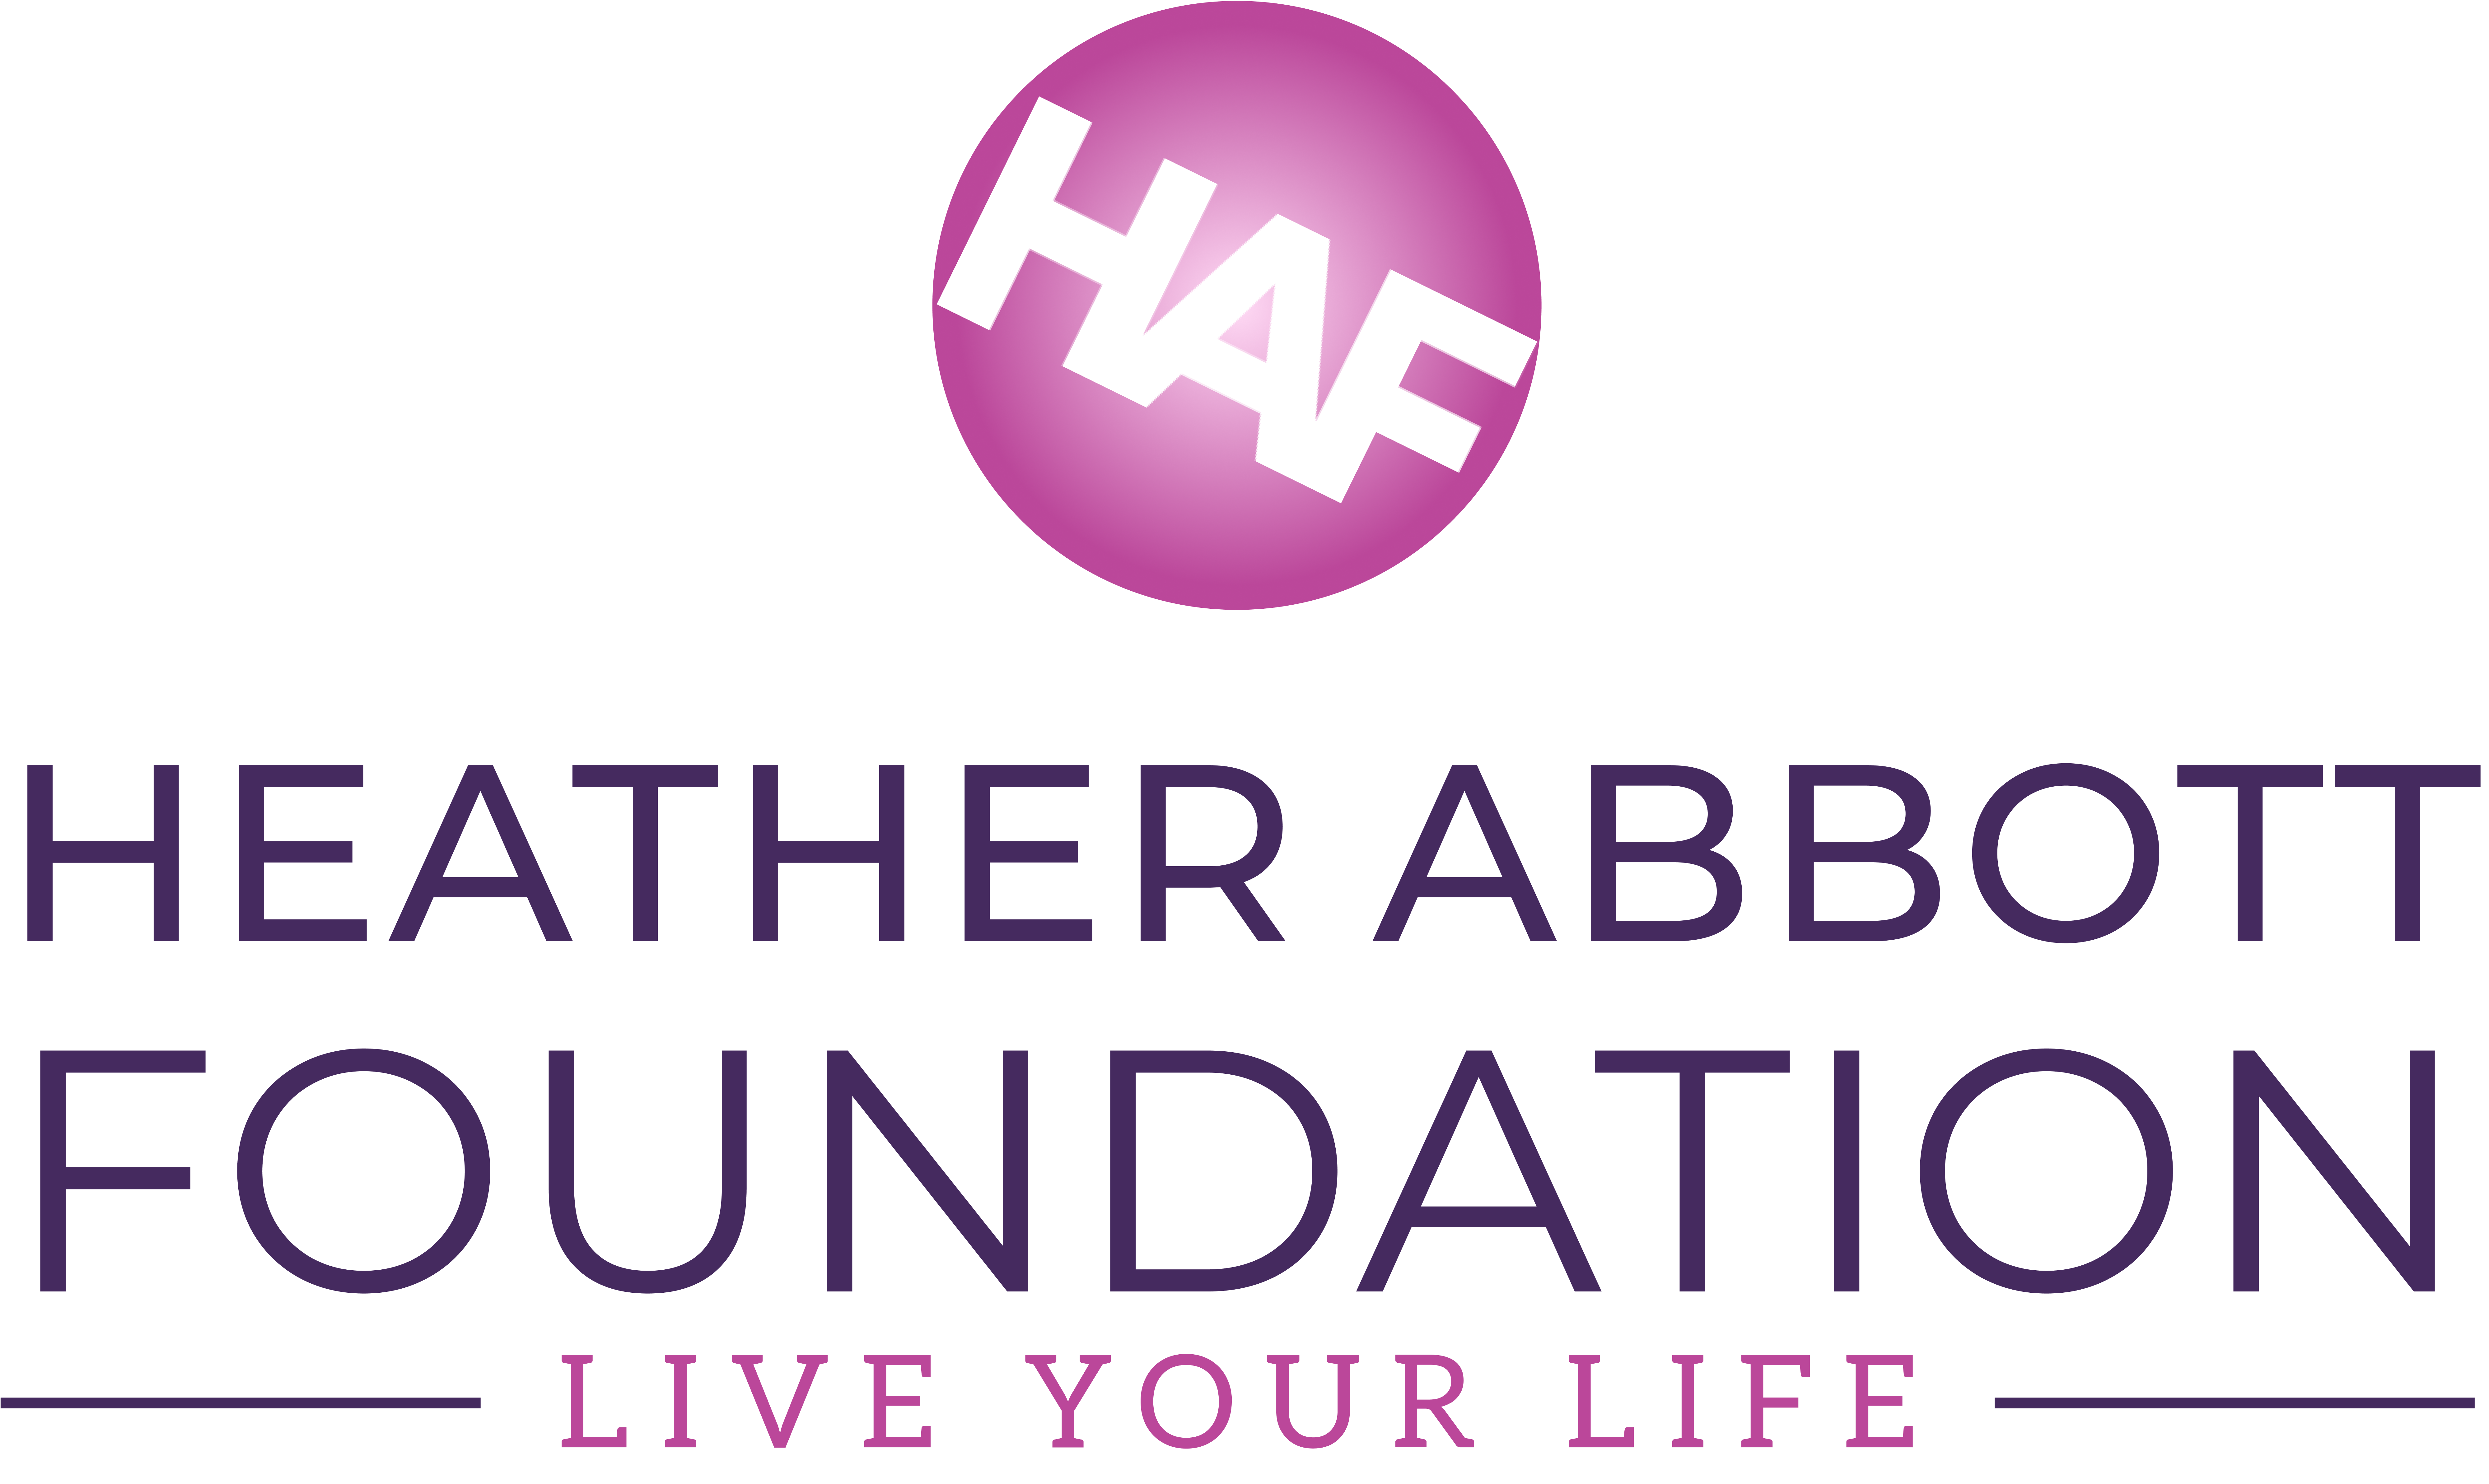 The official logo for the Heather Abbott Foundation. The name is spelled out in purple letters with the tagline "Live Your Life" underneath. Above the name is a pink/purple circle with the acronym HAF